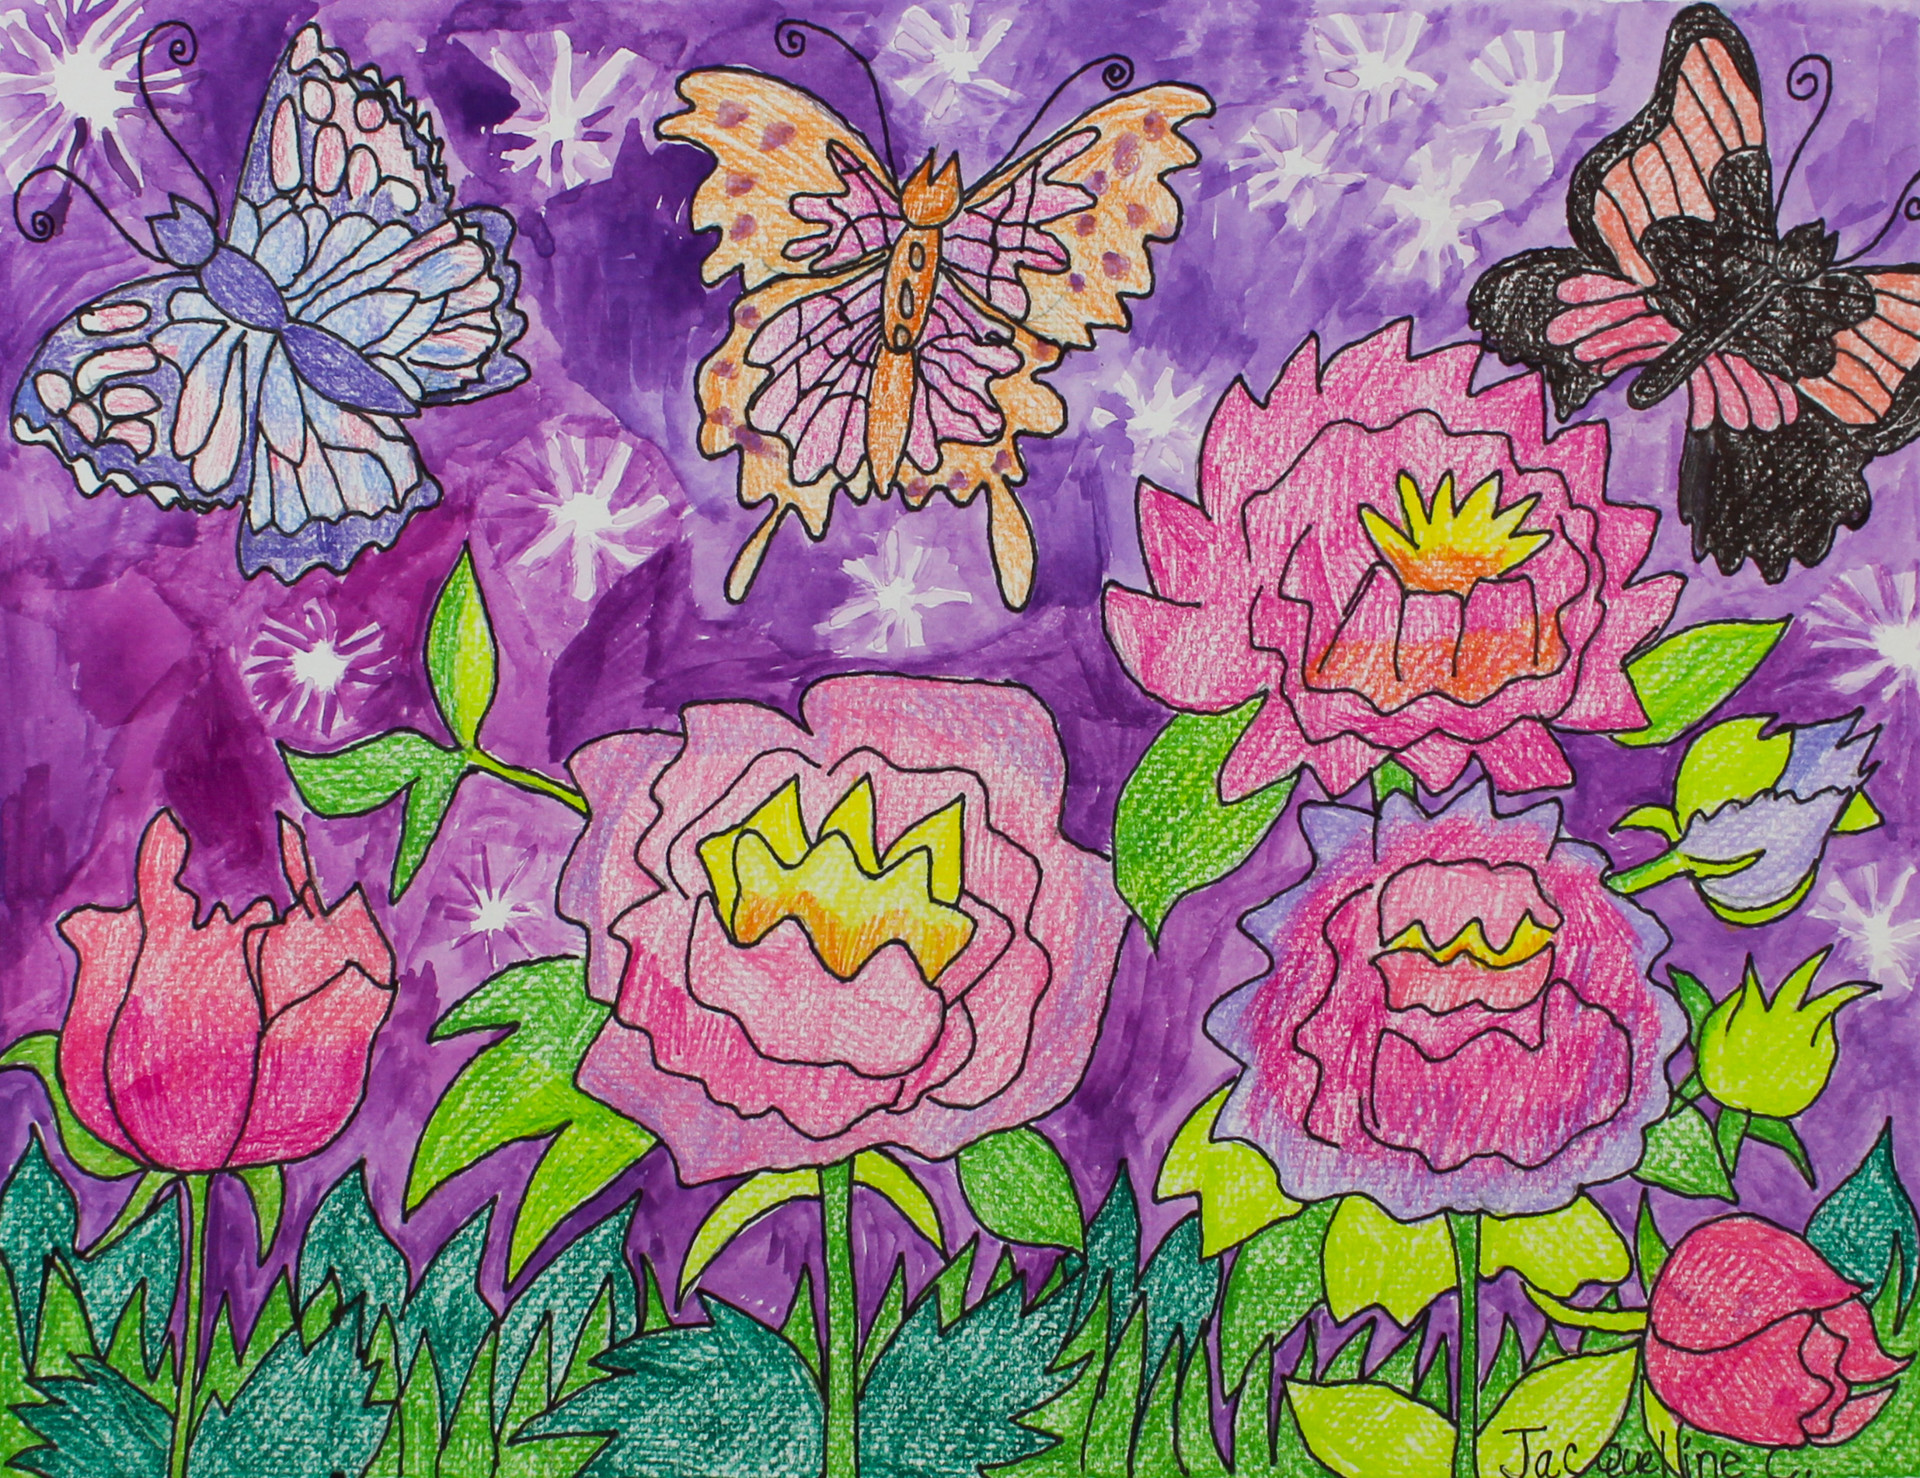 Butterflies and Flowers by Jacqueline Coleman